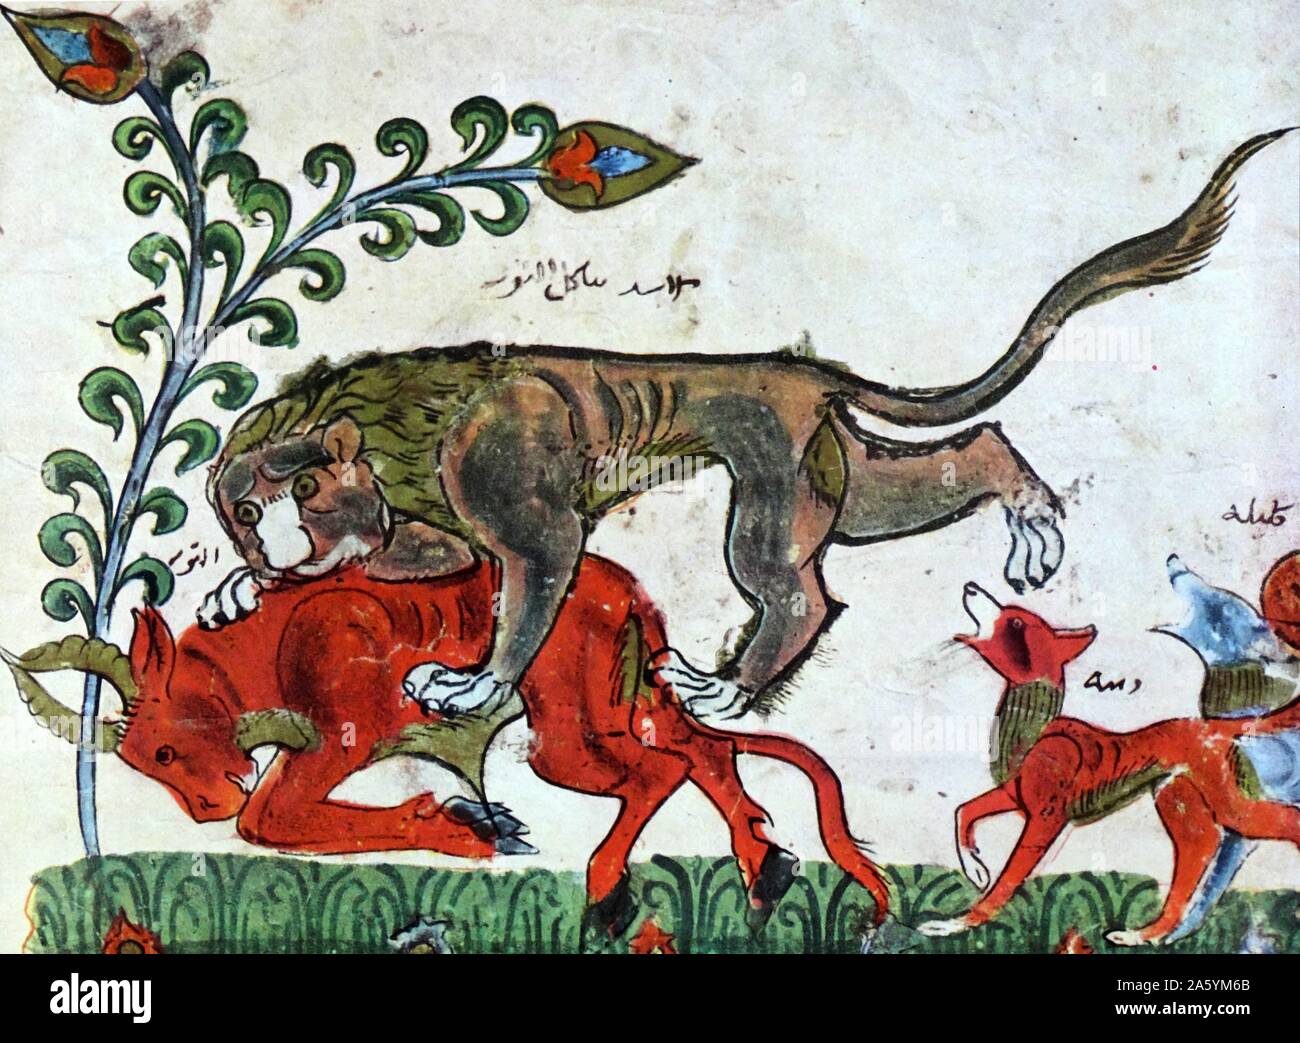 Arab illustration of the Lion Pingalaka is one of the Panchatantra, an ancient Indian inter-related collection of animal fables in verse and prose. The original Sanskrit work, which some scholars believe was composed in the 3rd century BCE. A New Persian version from the 12th century became known as Kal?leh o Demneh. The book in different form is also known as The Fables of Bidpai. 13th century Stock Photo